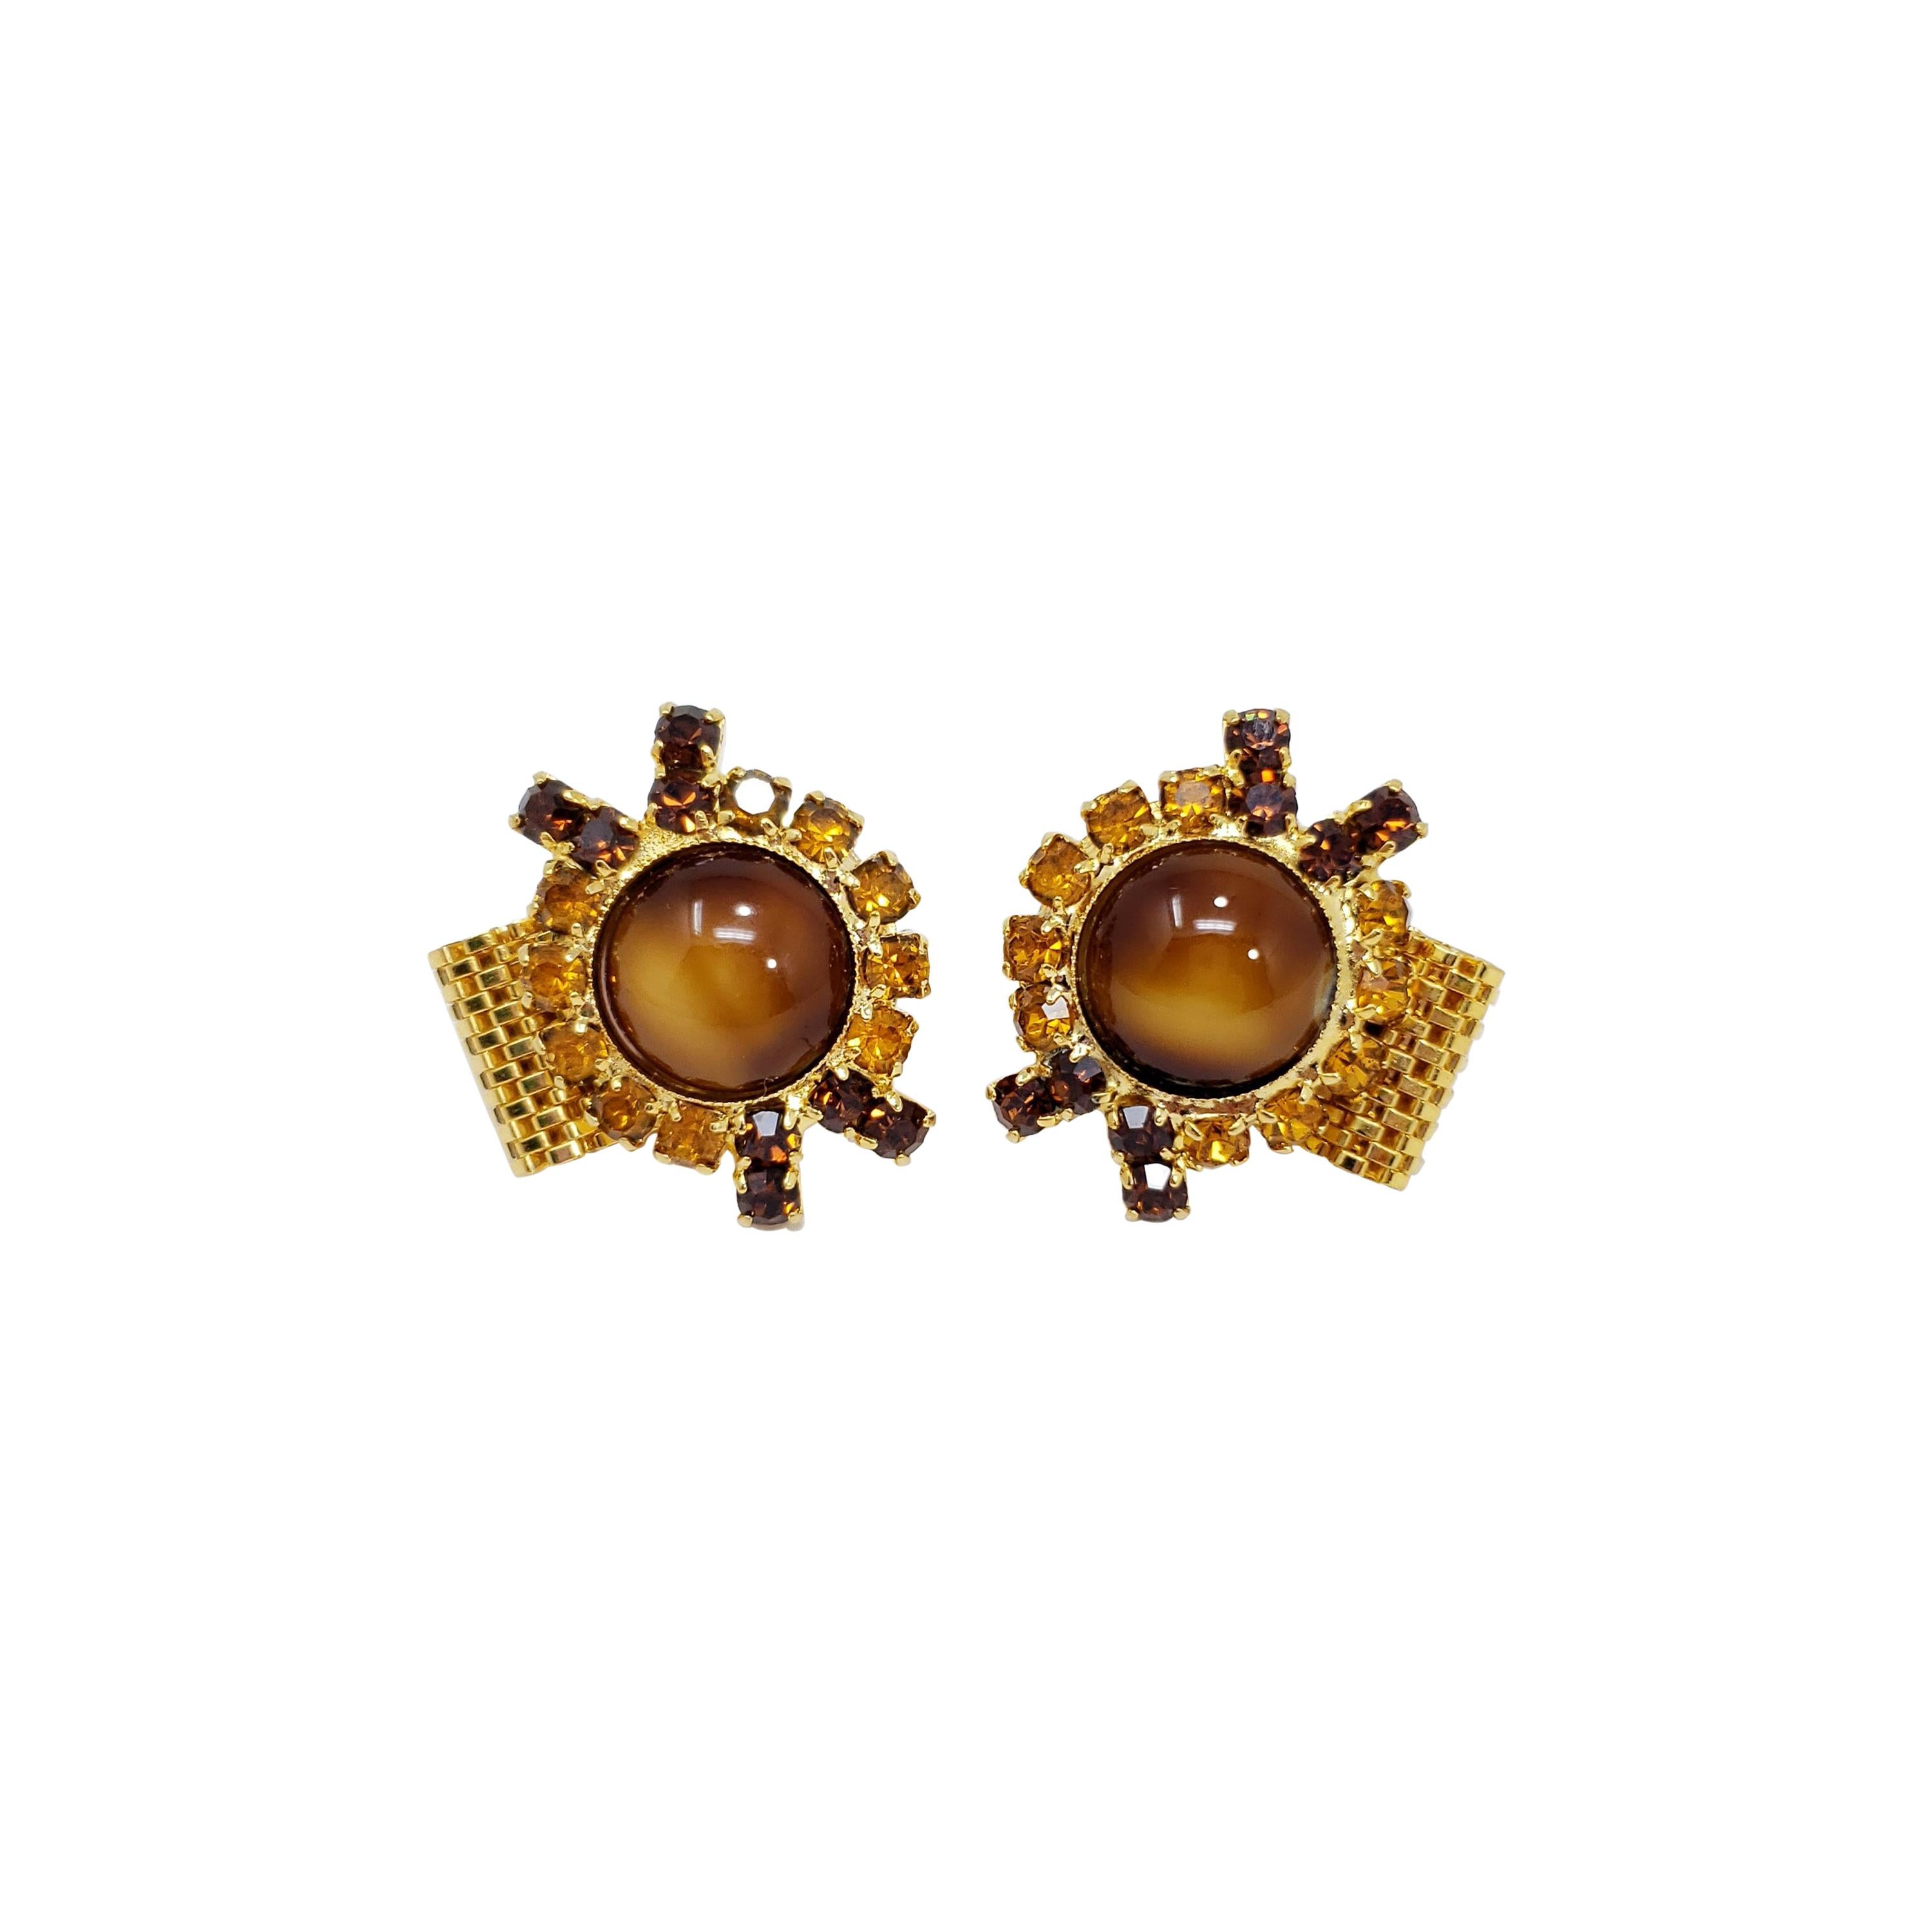 Vintage Golden Cufflinks and Stud, Amber Crystals and Mesh Findings